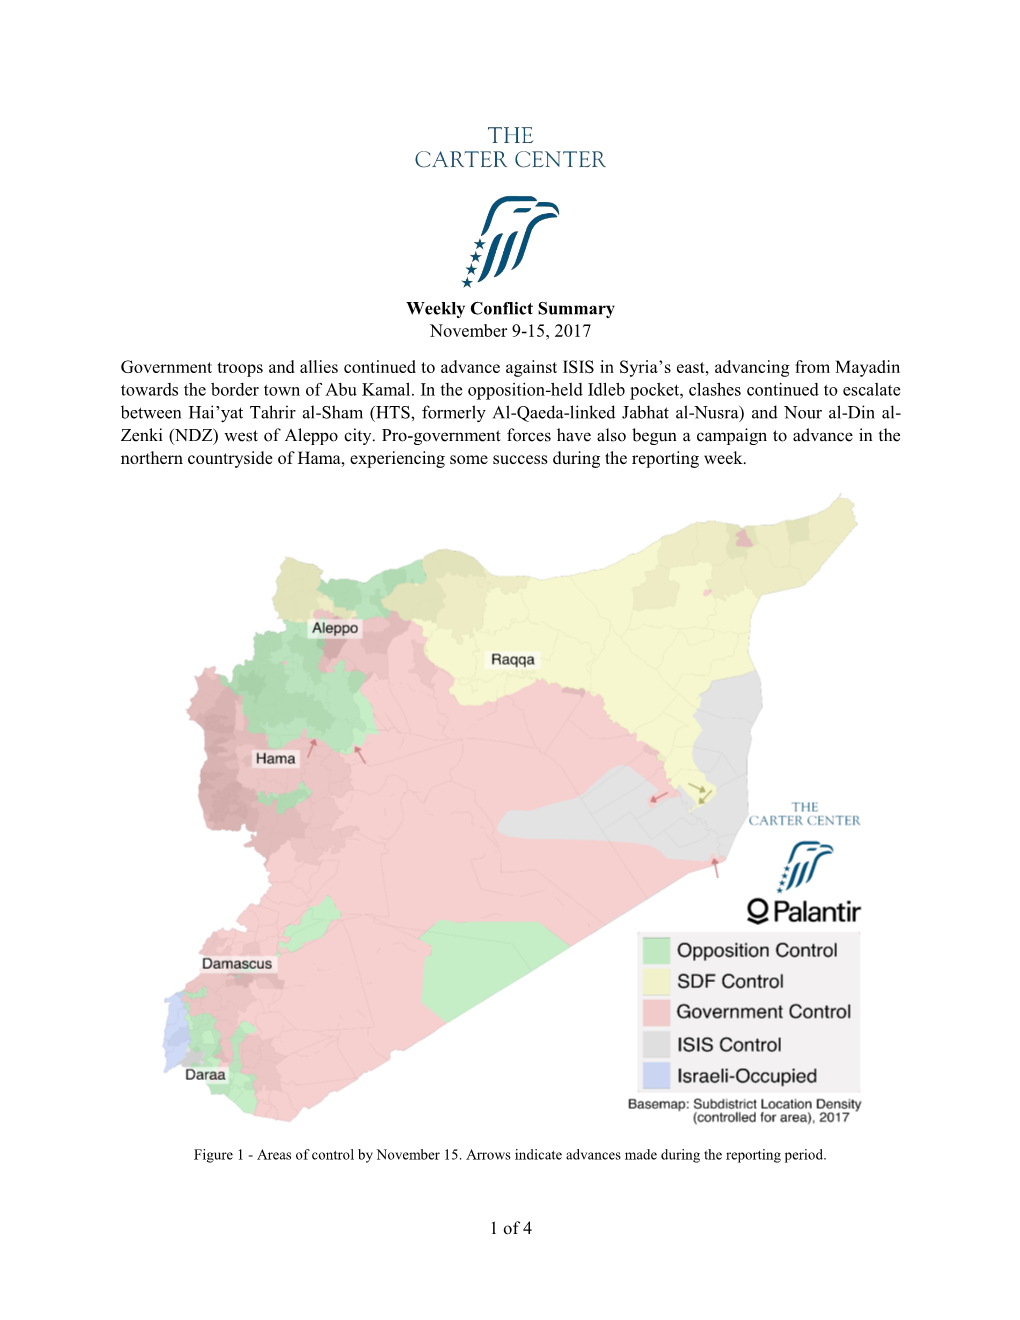 1 of 4 Weekly Conflict Summary November 9-15, 2017 Government Troops and Allies Continued to Advance Against ISIS in Syria's E